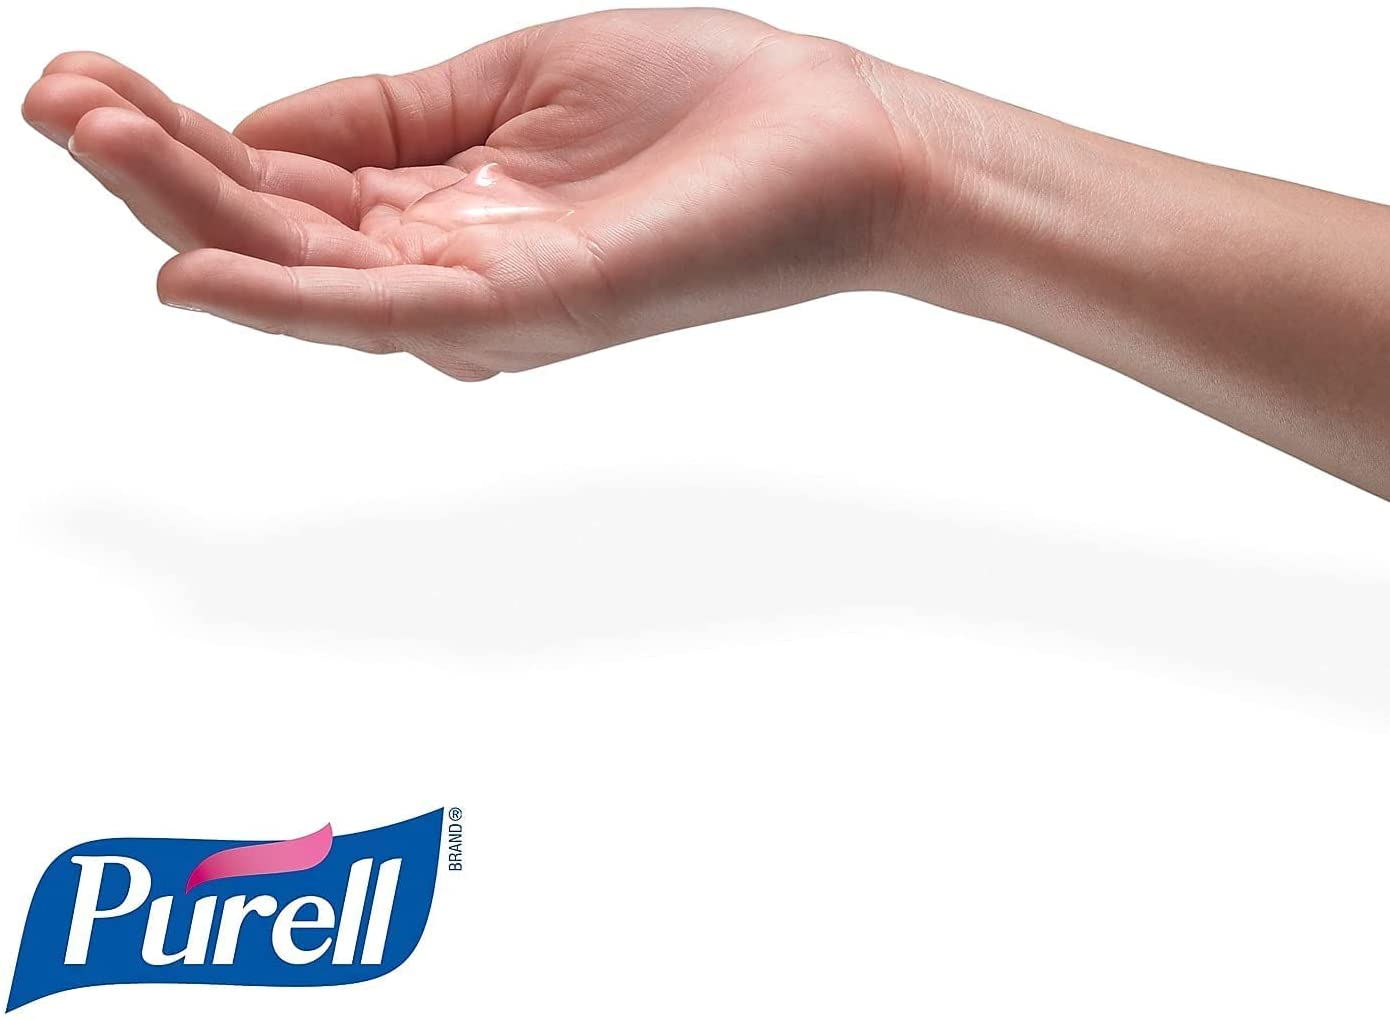 Purell Advanced Instant Hand Sanitizer Gel 8 oz (Pack of 3)